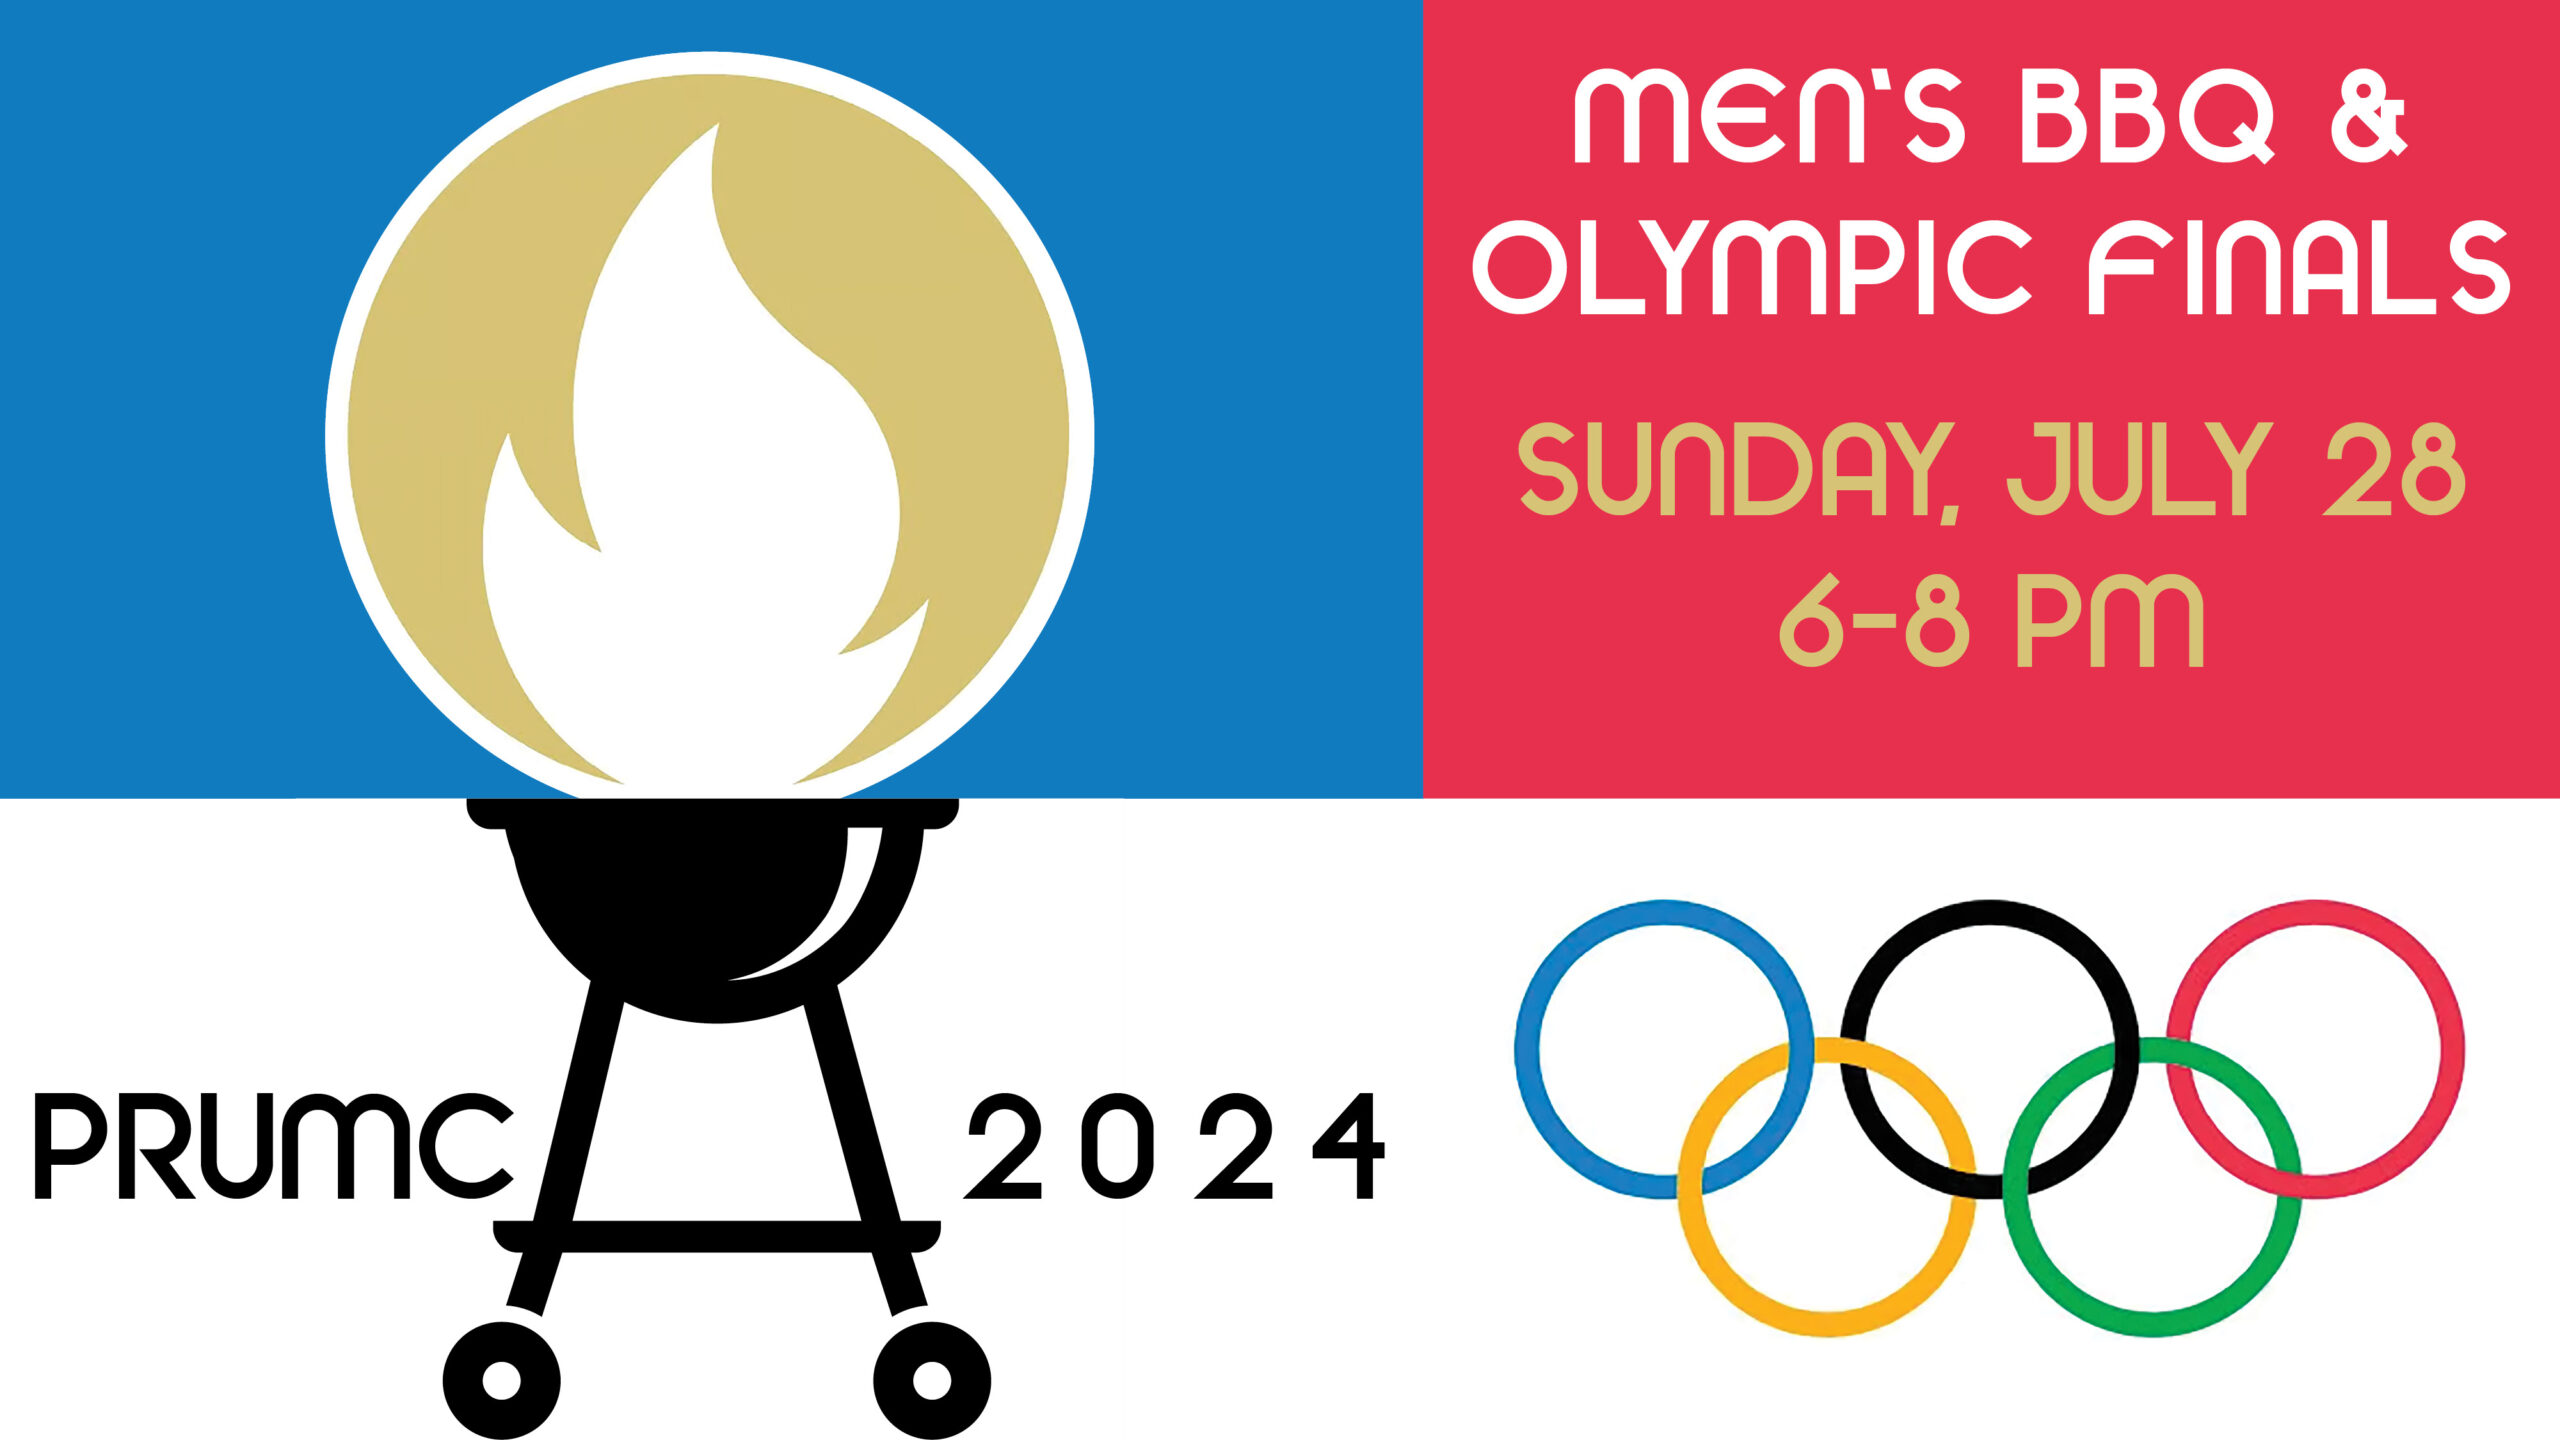 Men's BBQ and Olympic Viewing Party